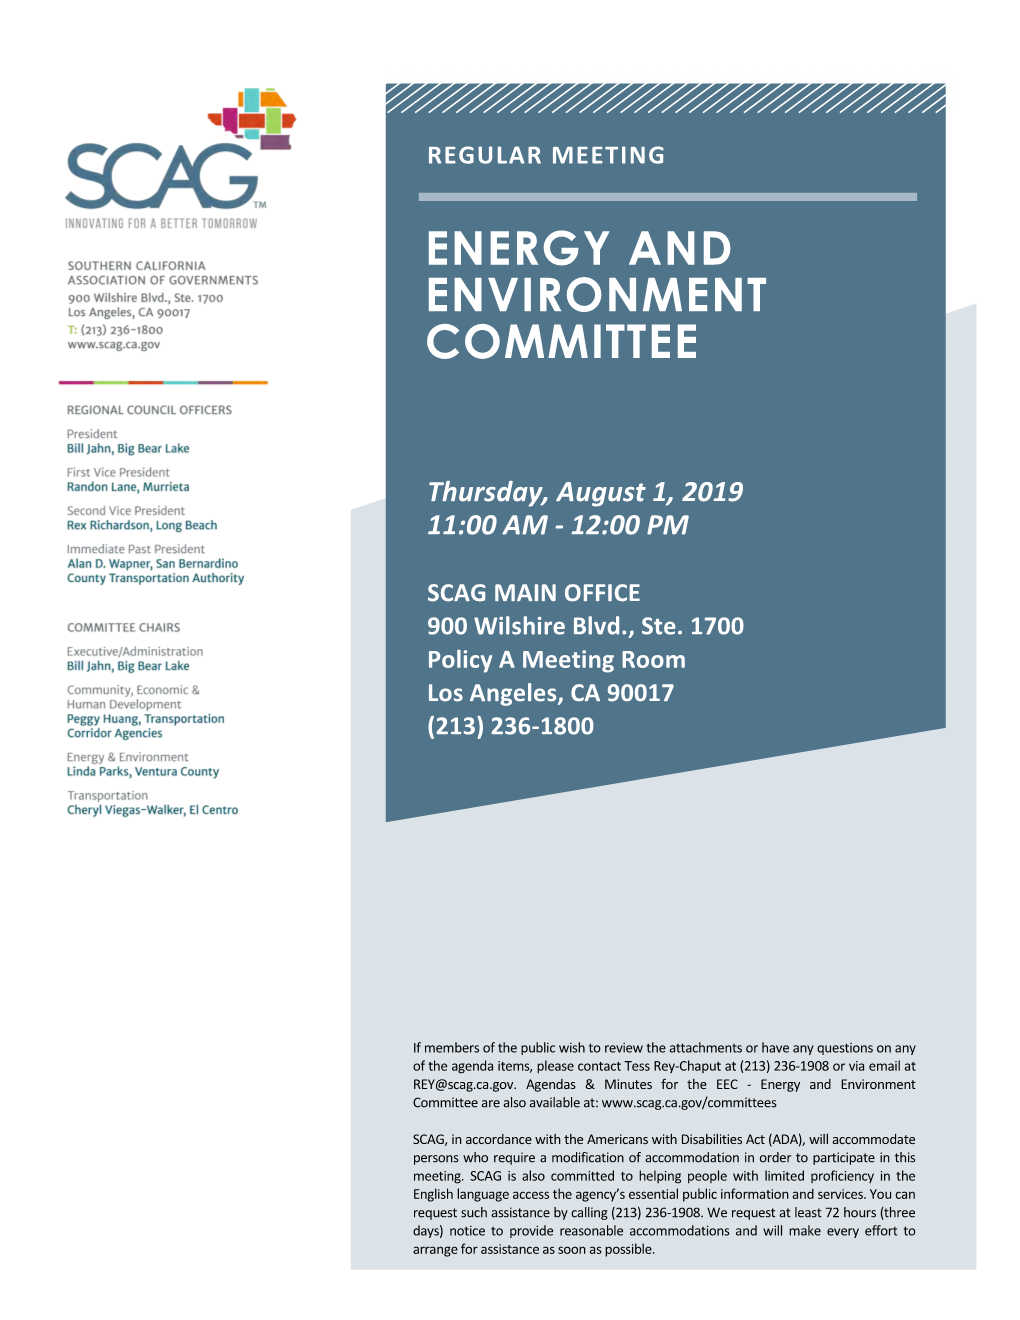 Energy and Environment Committee August 1, 2019 Full Agenda Packet